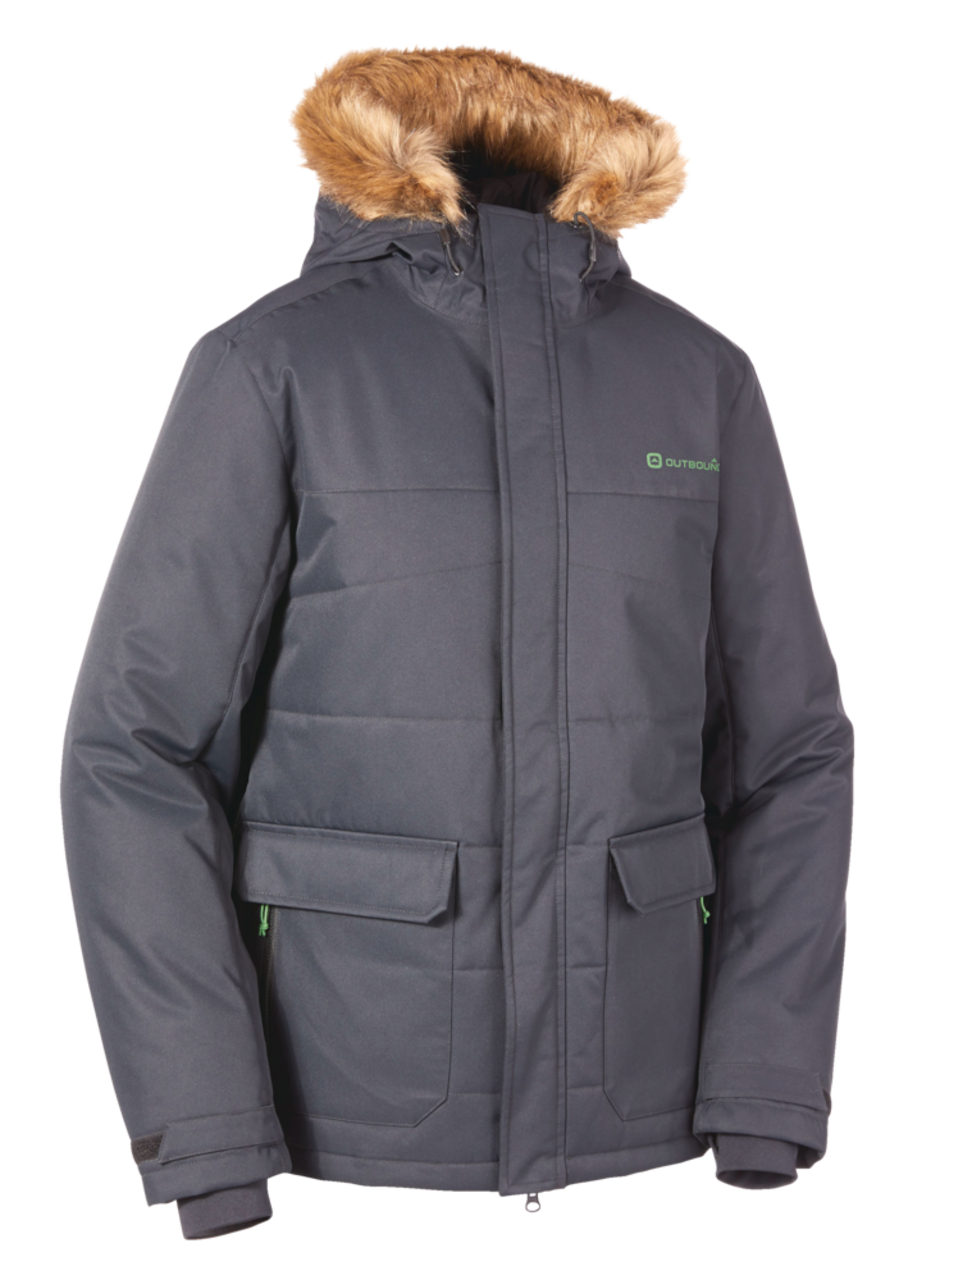 Outbound Men's Holloway Insulated Hooded Winter Parka Jacket  Water-Resistant, Black